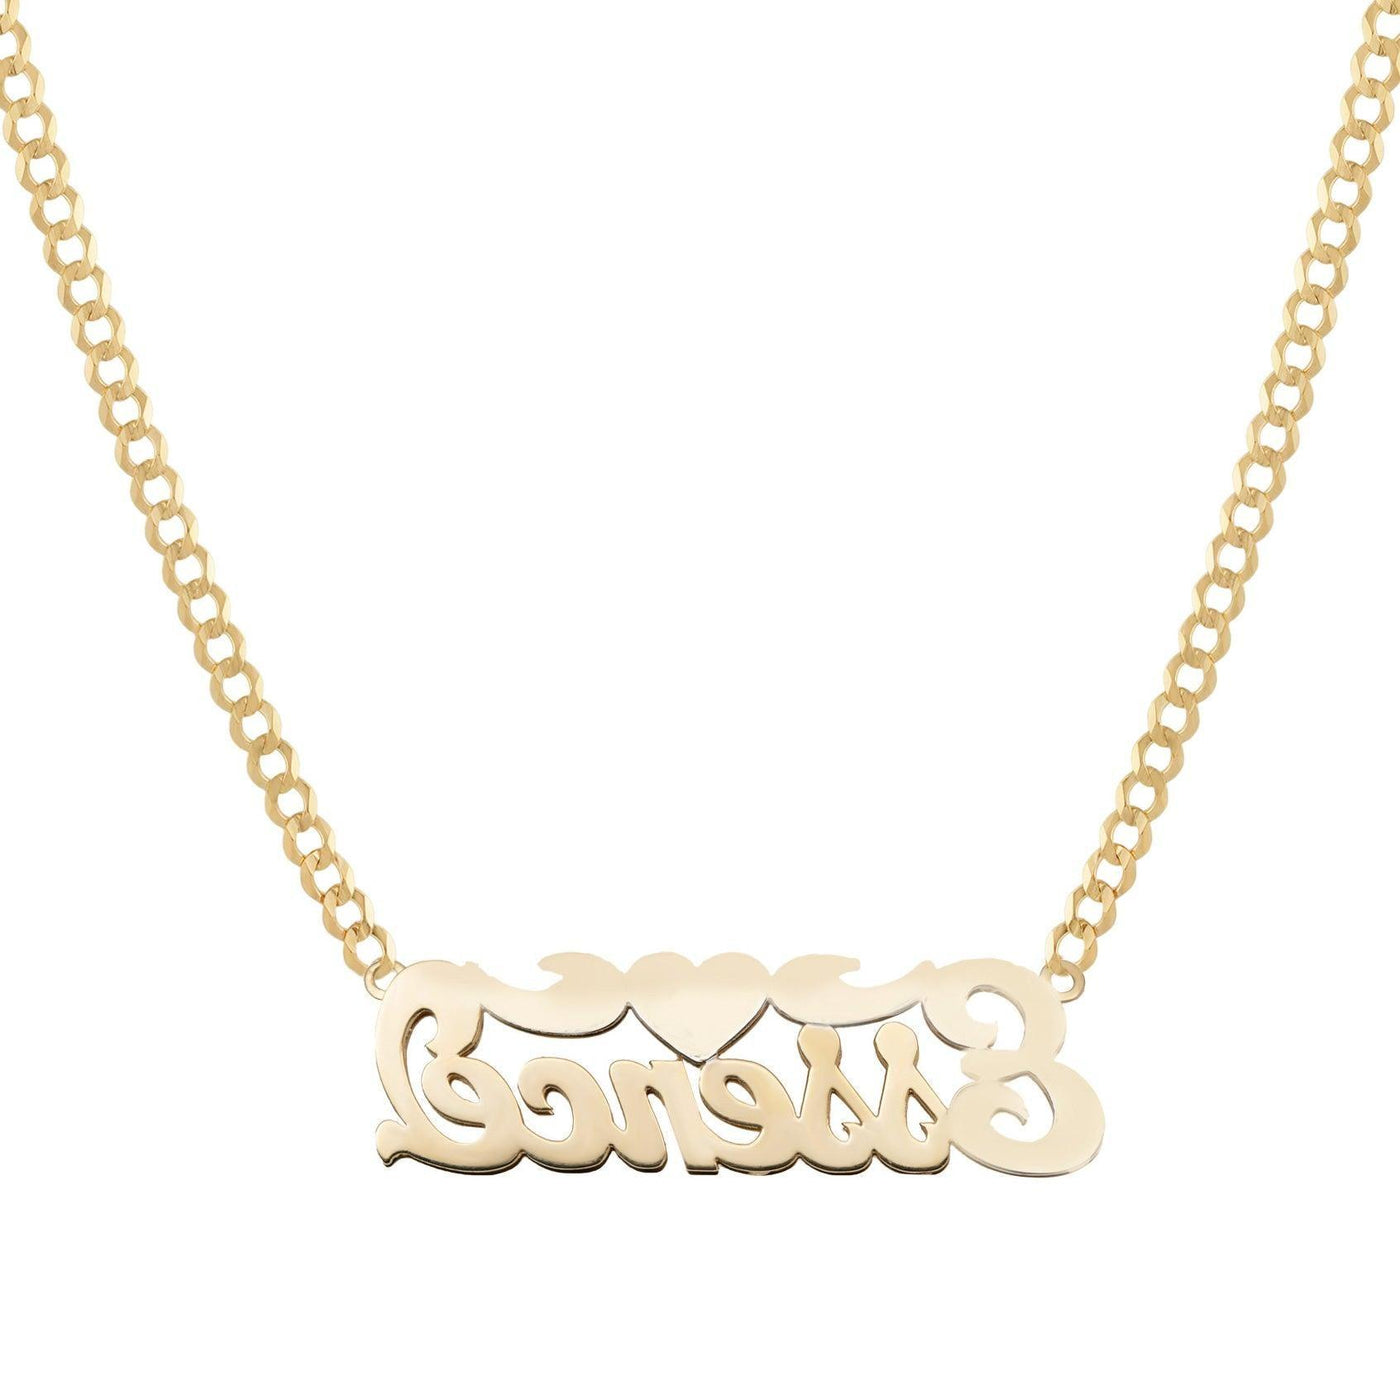 Ladies Script Name Plate Heart Ribbon Necklace 14K Gold - Style 52 - bayamjewelry